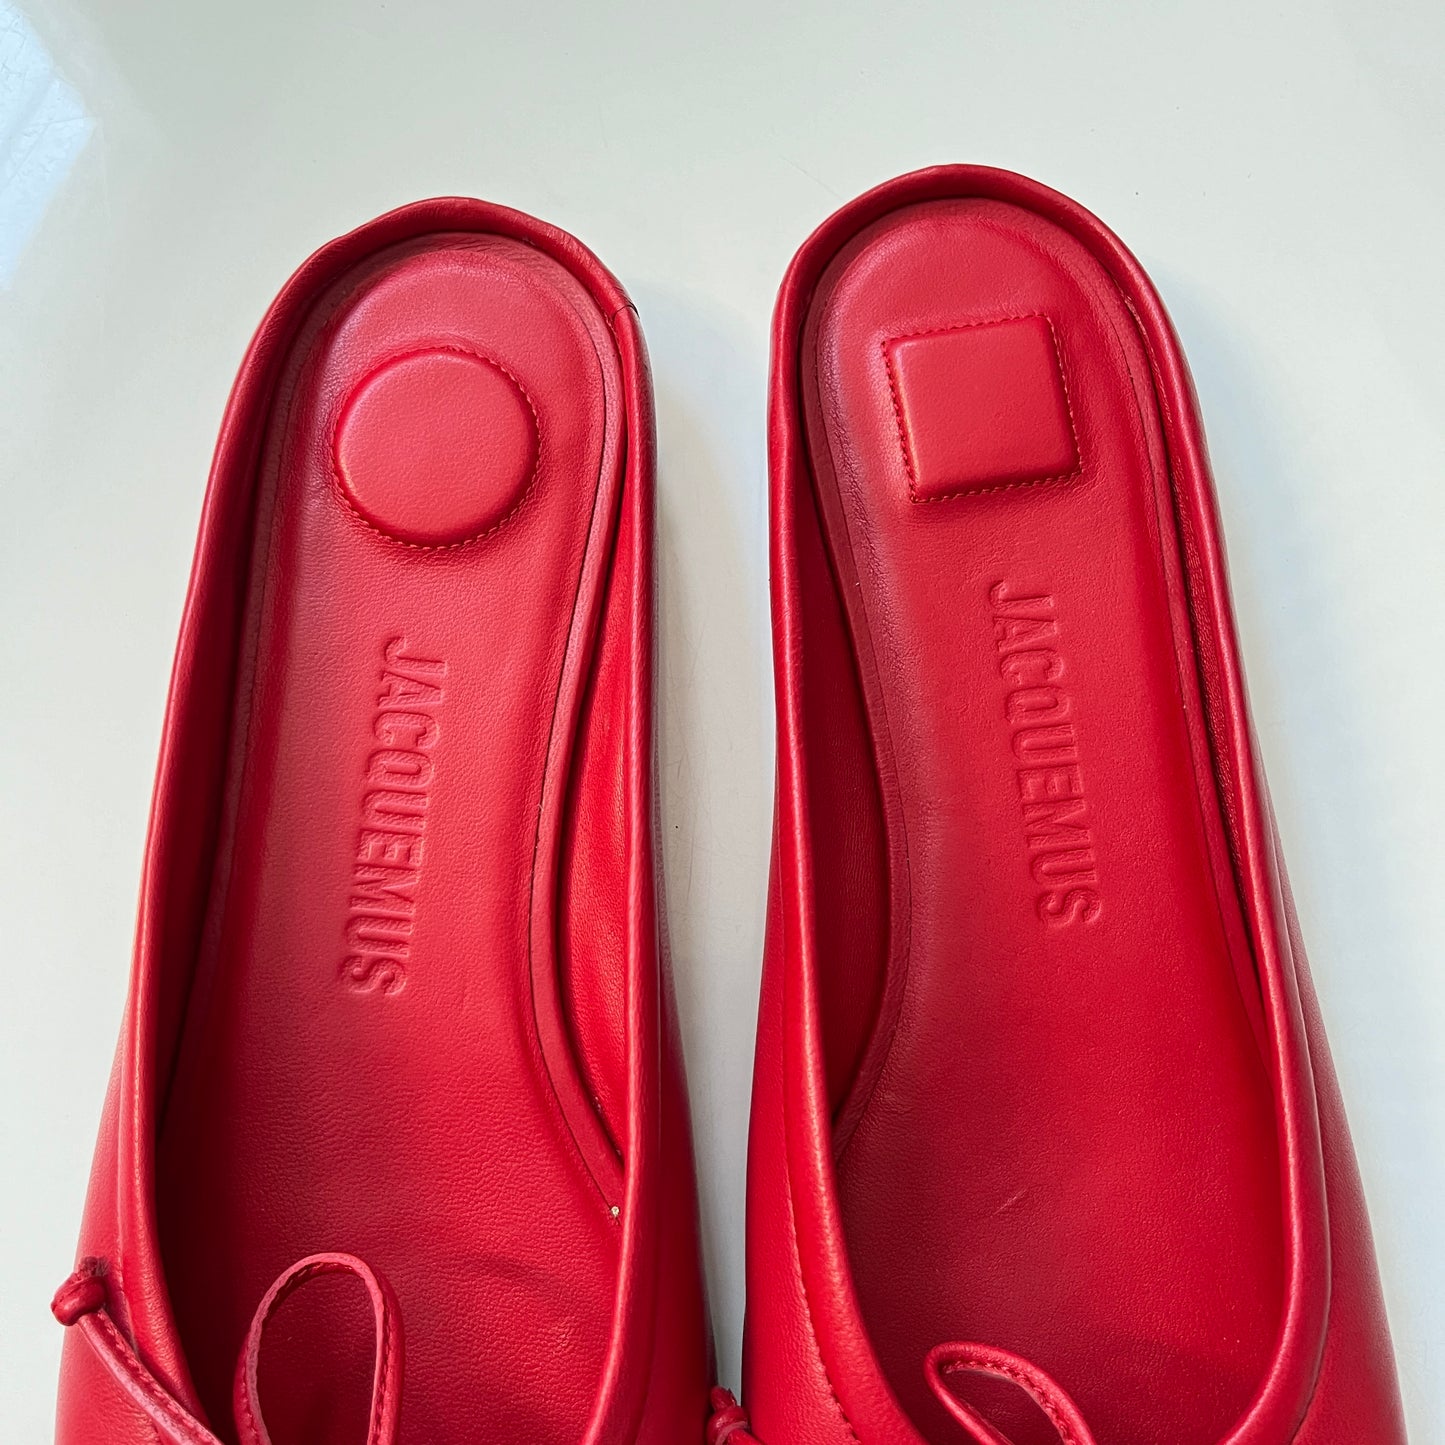 JACQUEMUS Les Mules Plates Ballet in Red